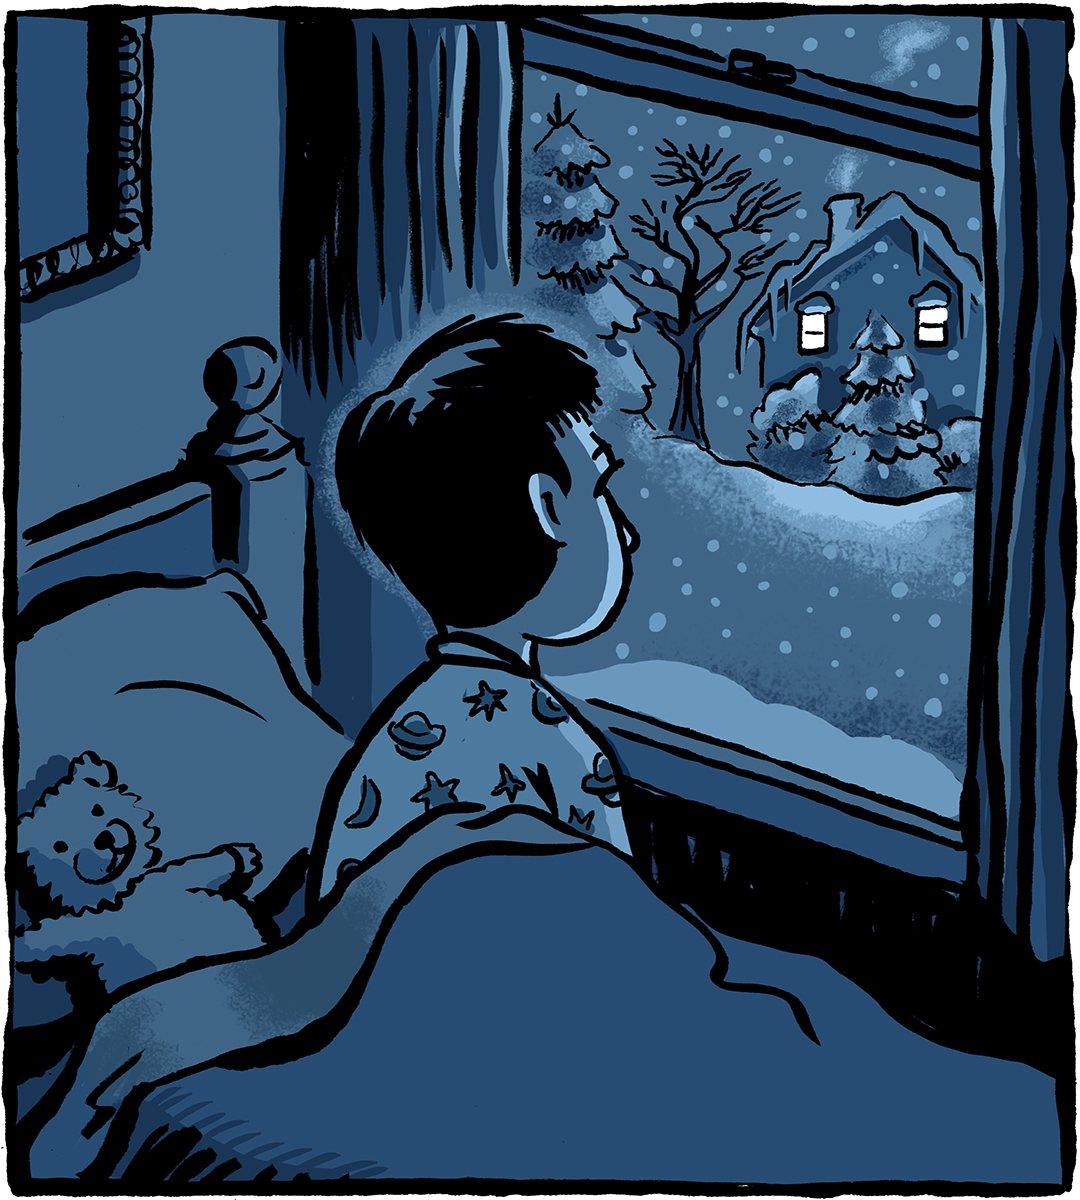 Panel from "Welcome to the New World" comic.